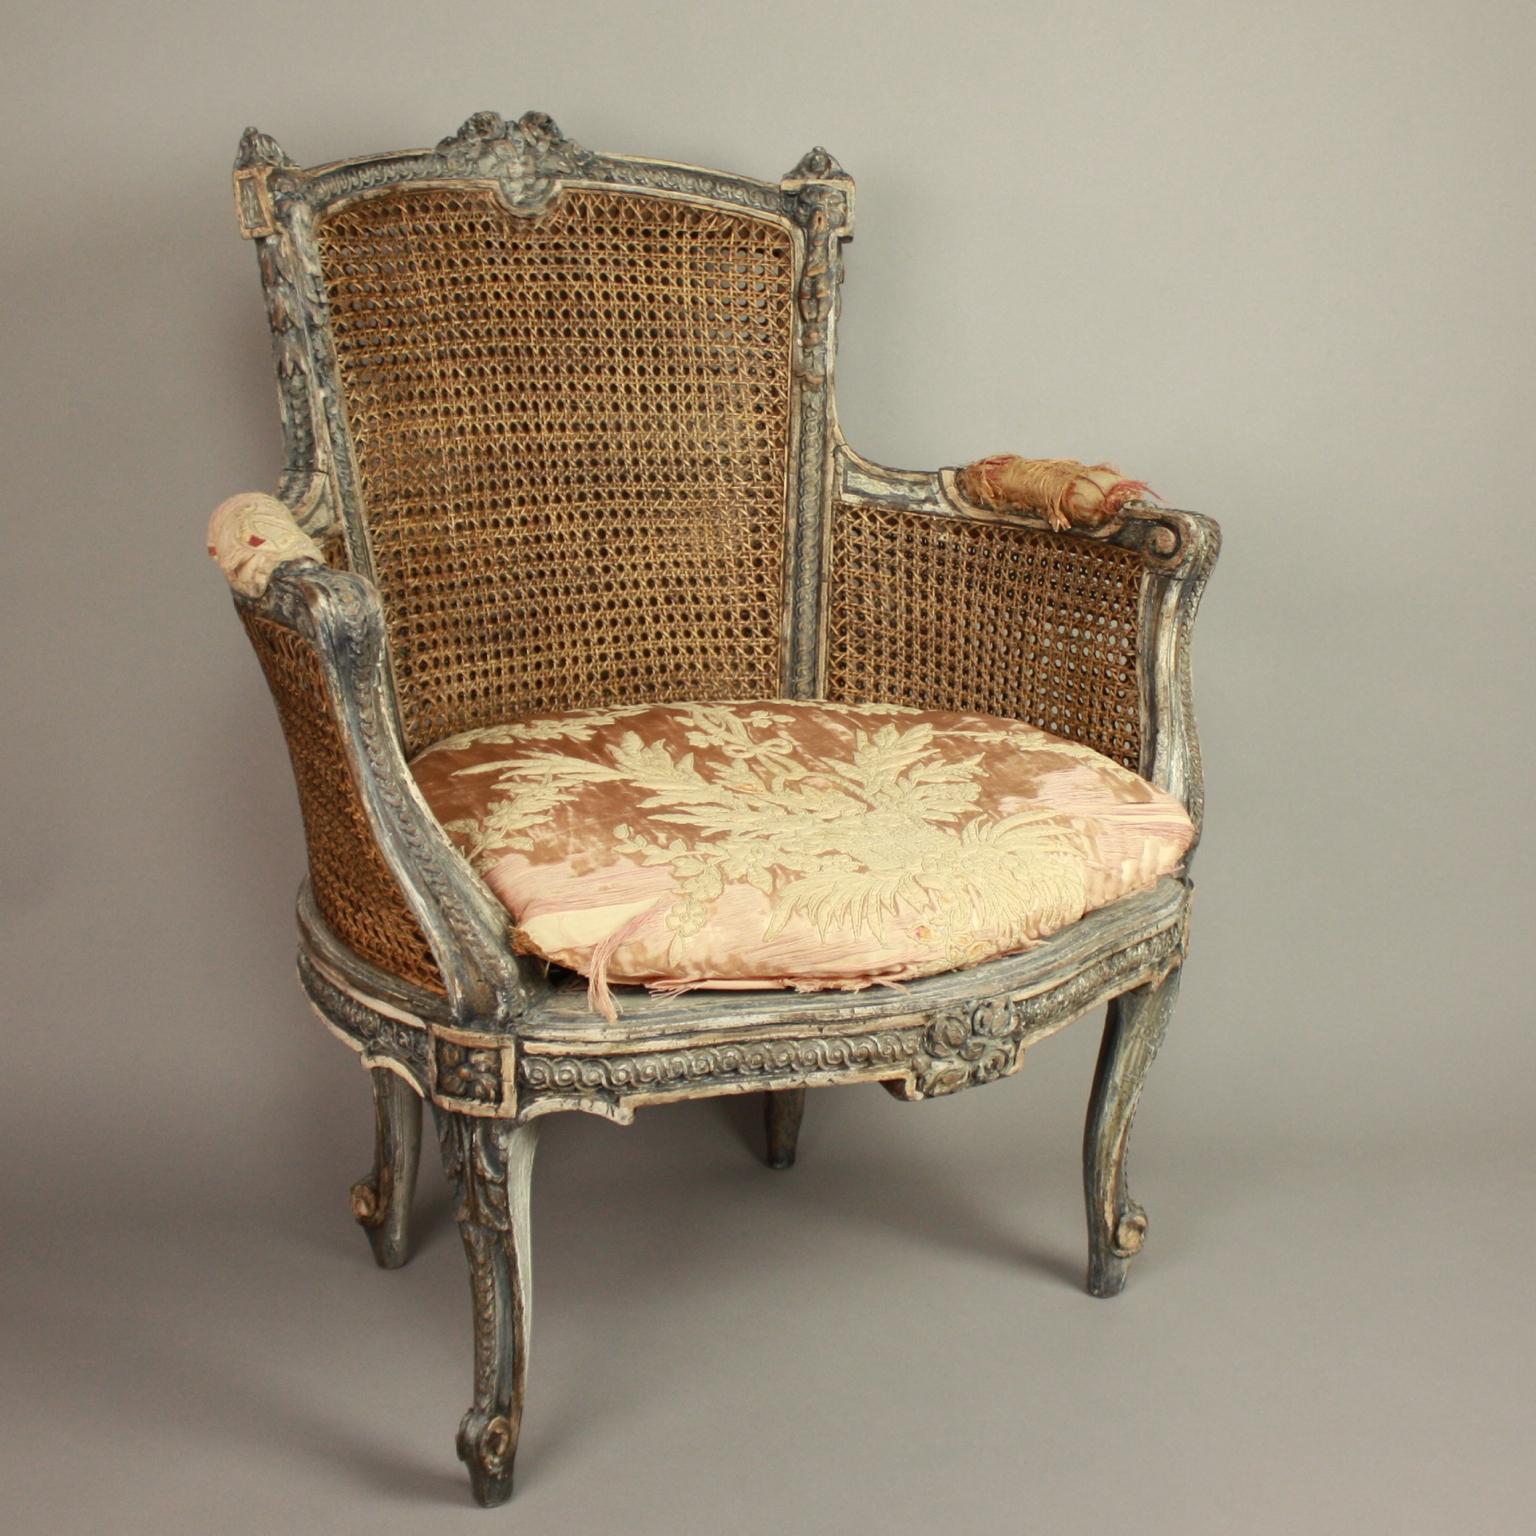 A 19th century Louis XVI style caned and painted bergere, with double caned back and sides, the frame carved with ribbon and guilloche ornament, painted in grey and white, resting on cabriole legs. The loose seat cushion upholstered with an